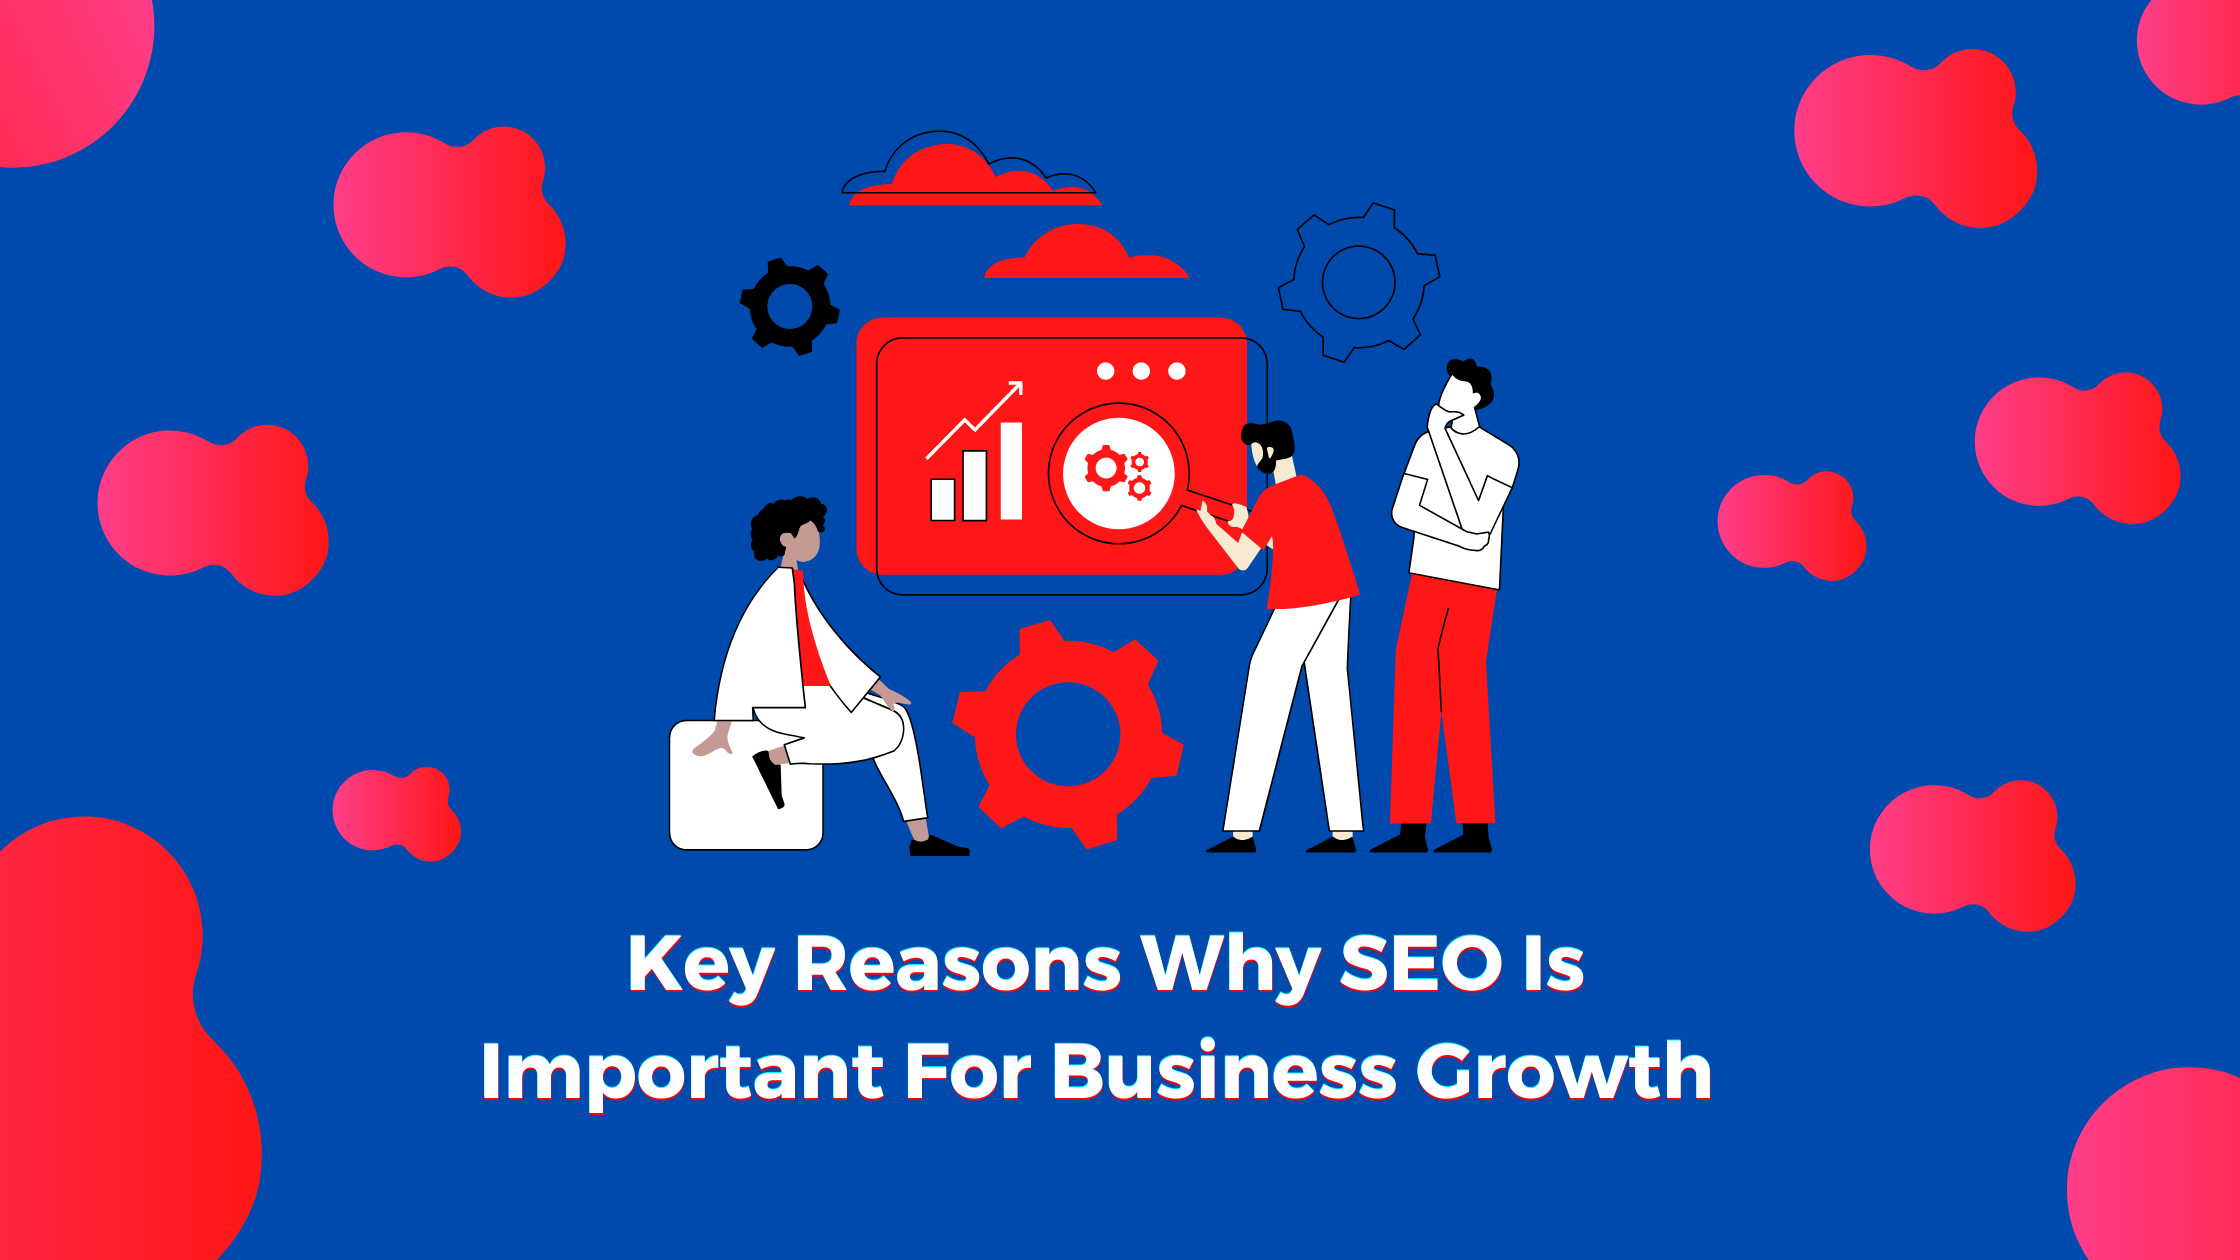 Key Reasons Why SEO Is Important For Business Growth